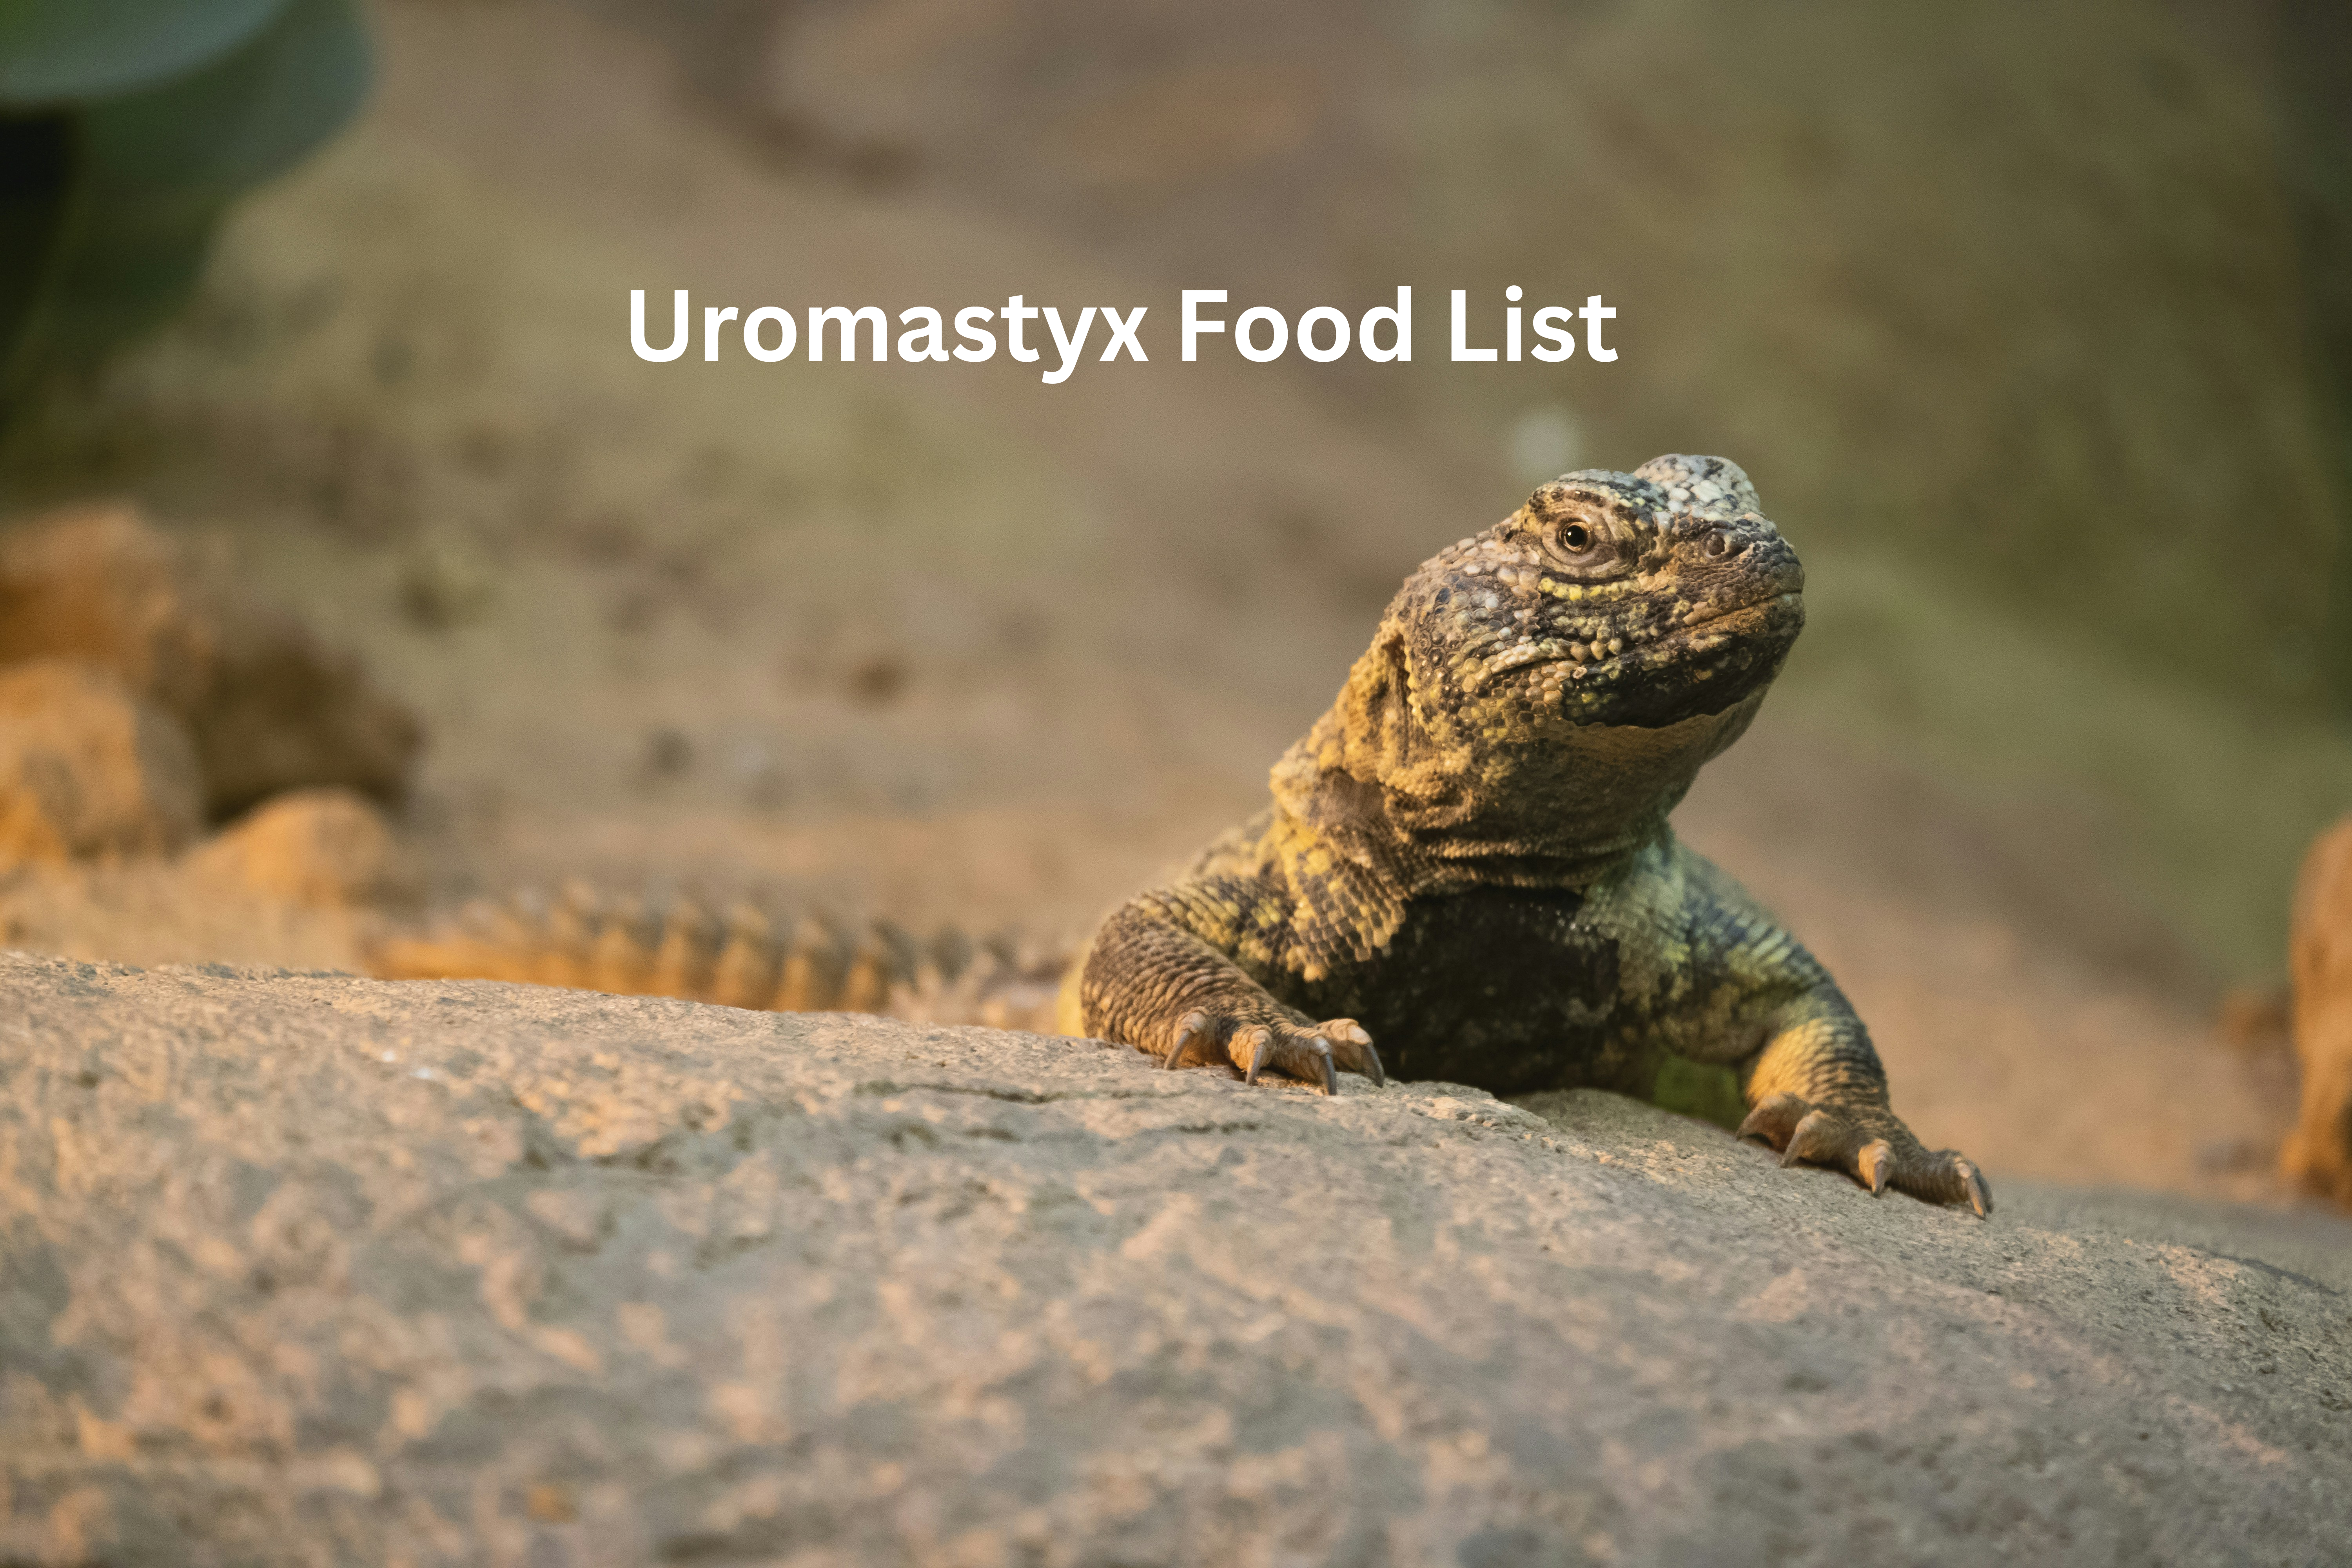 How to feed Uromastyx